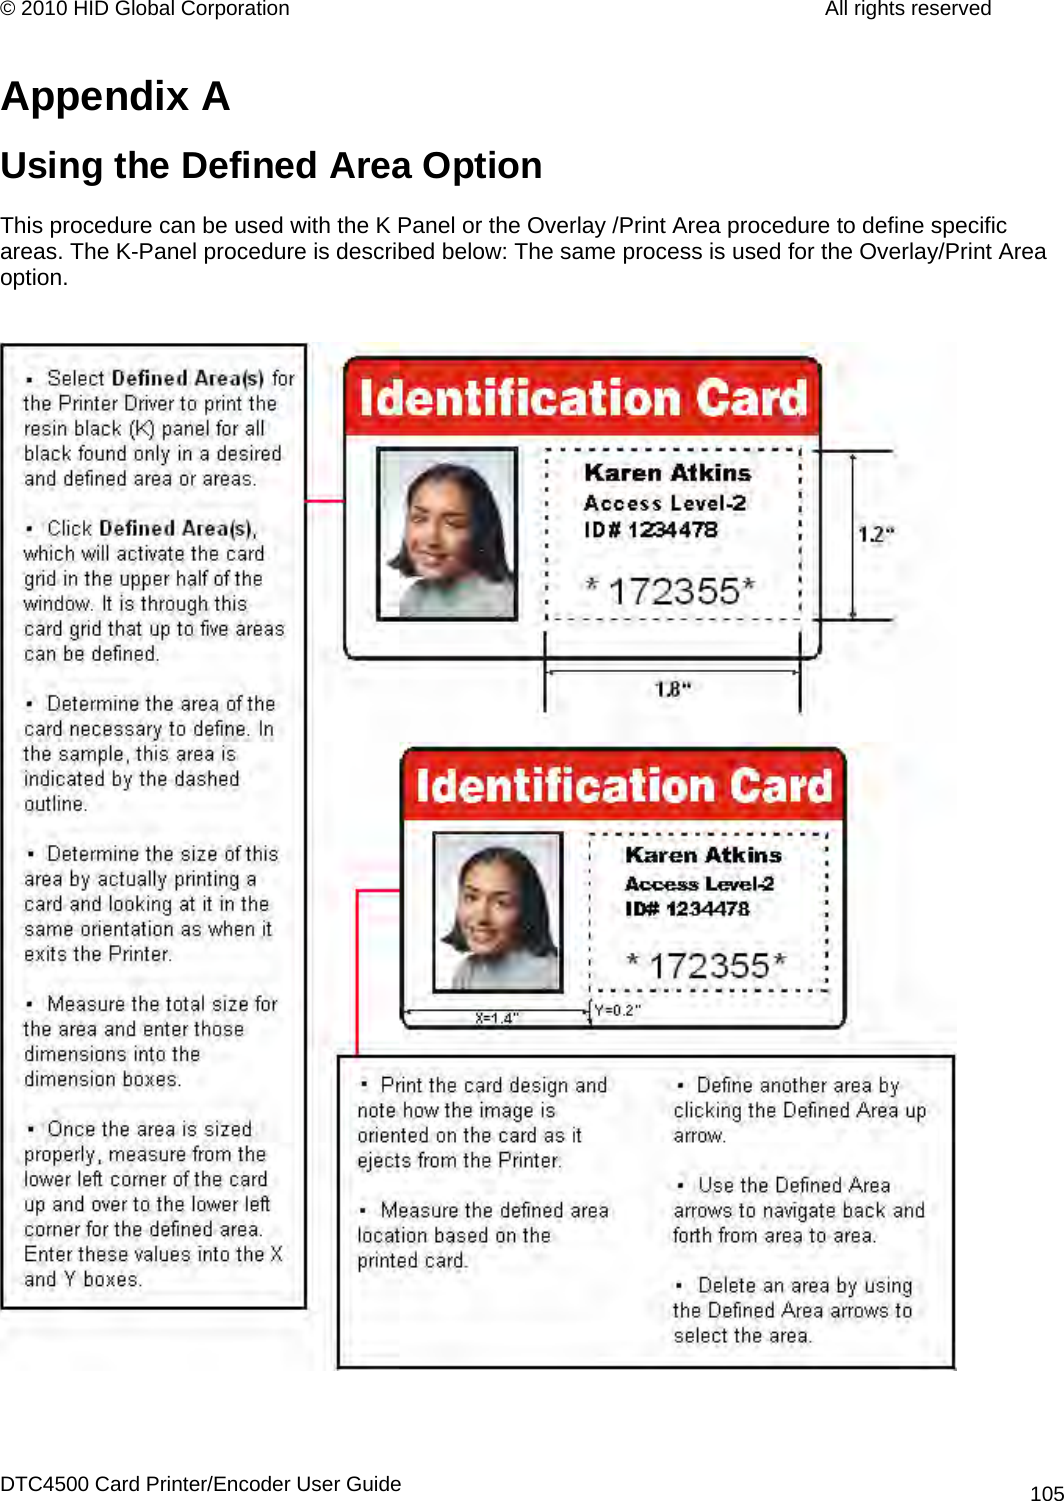 © 2010 HID Global Corporation         All rights reserved  Appendix A Using the Defined Area Option This procedure can be used with the K Panel or the Overlay /Print Area procedure to define specific areas. The K-Panel procedure is described below: The same process is used for the Overlay/Print Area option.     DTC4500 Card Printer/Encoder User Guide 105